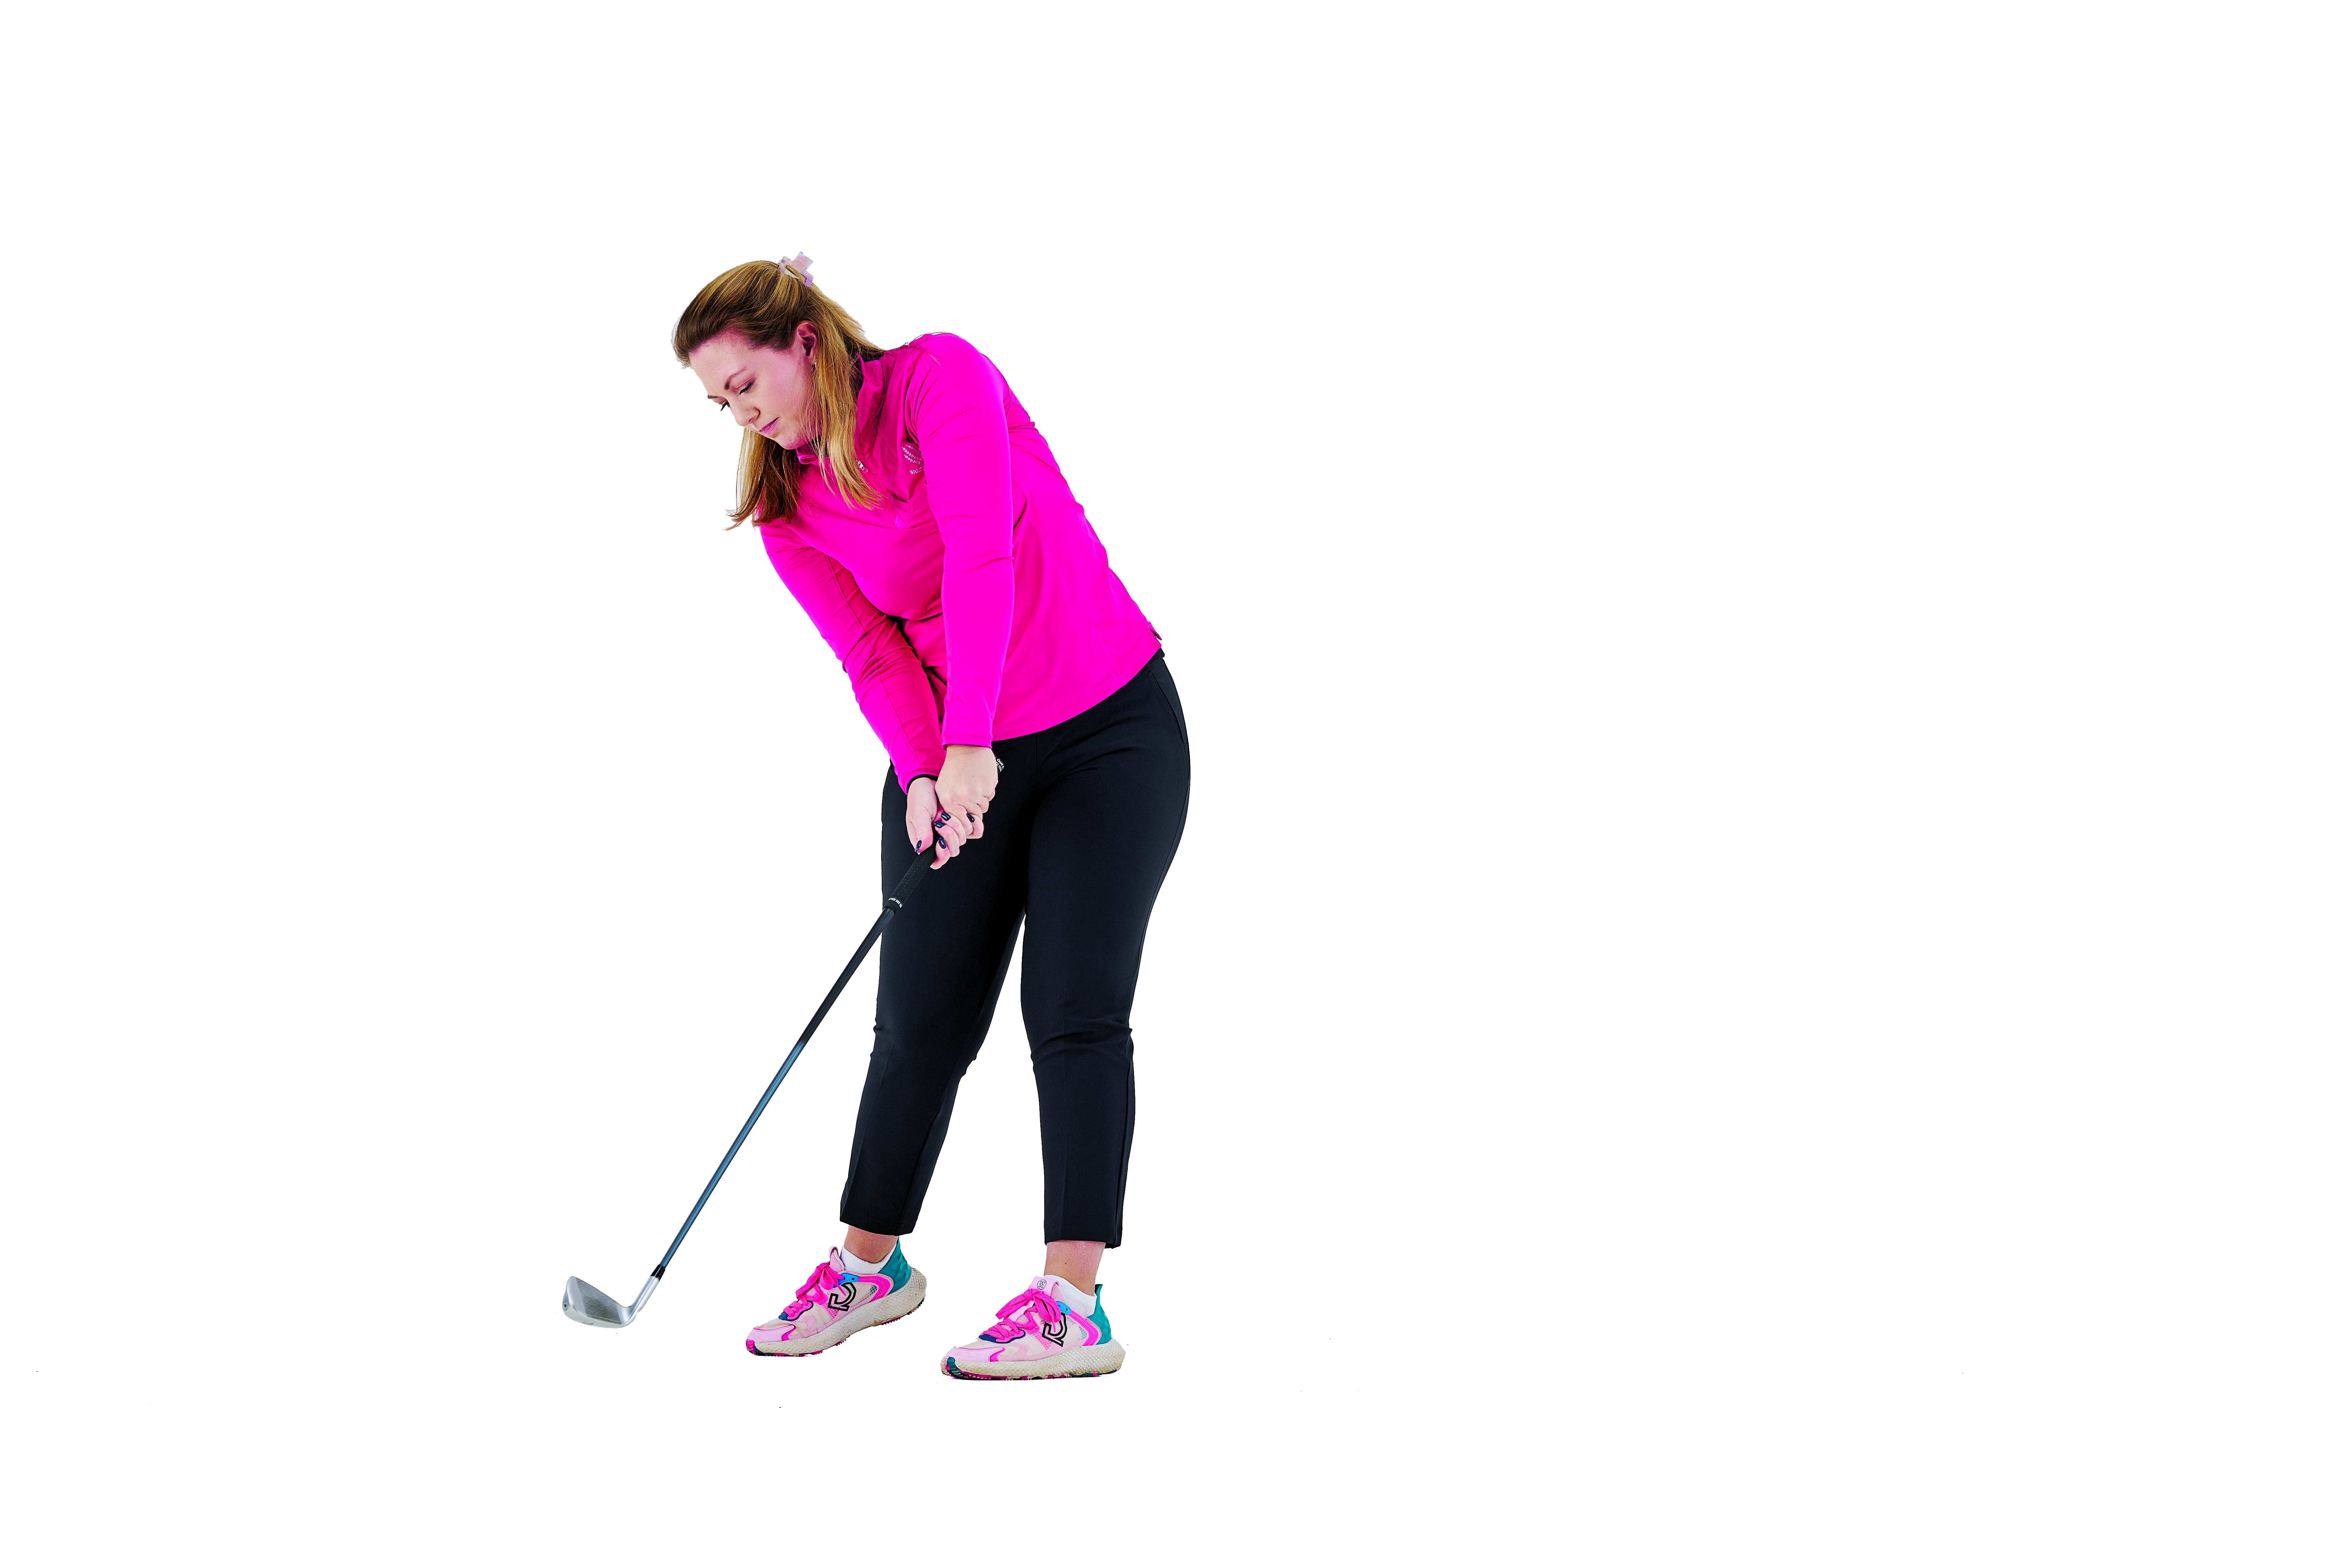 Golf Monthly Top 50 Coach Jo Taylor demonstrating the golf swing with an iron